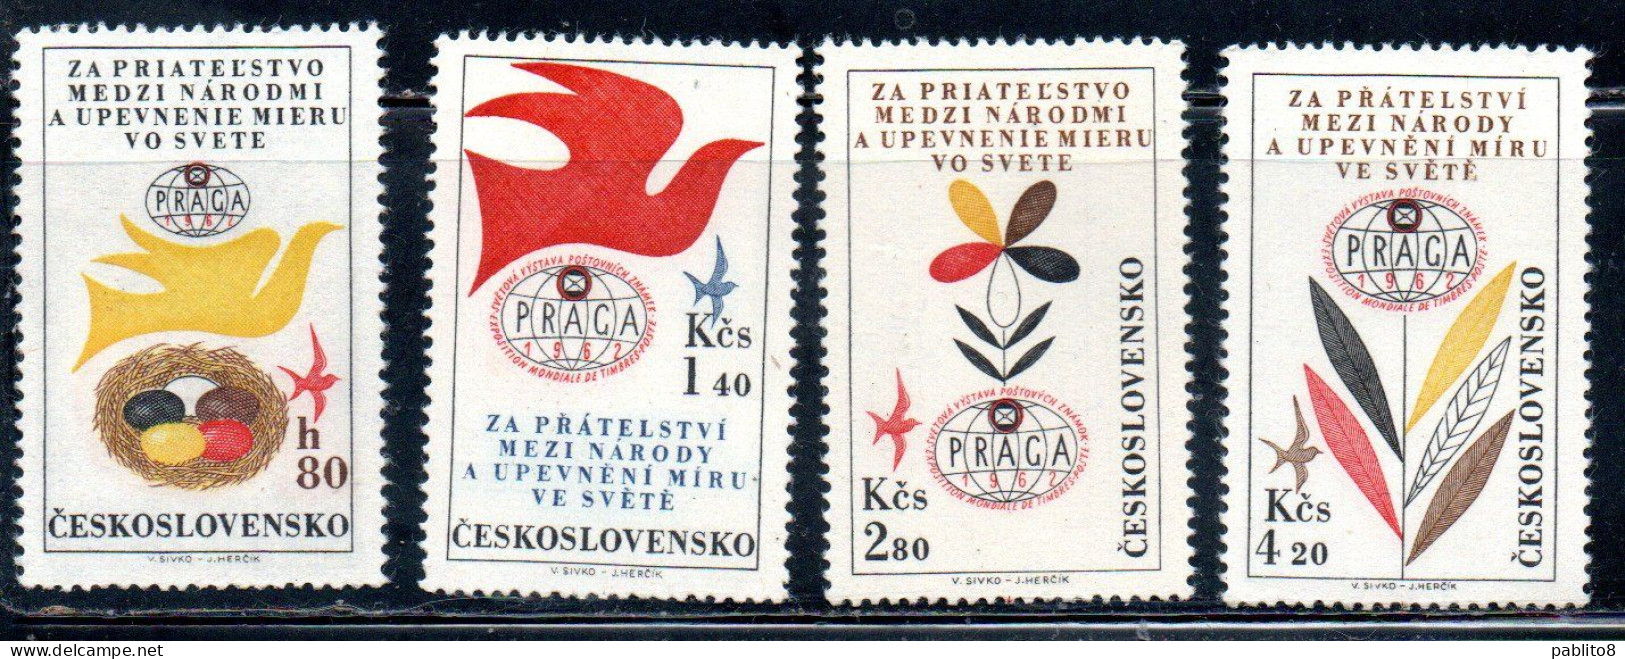 CZECHOSLOVAKIA CECOSLOVACCHIA 1962 AIR POST MAIL AIRMAIL PRAGA 62 WORLD EXHIBITION POSTAGE STAMPS COMPLETE SET SERIE MNH - Luchtpost